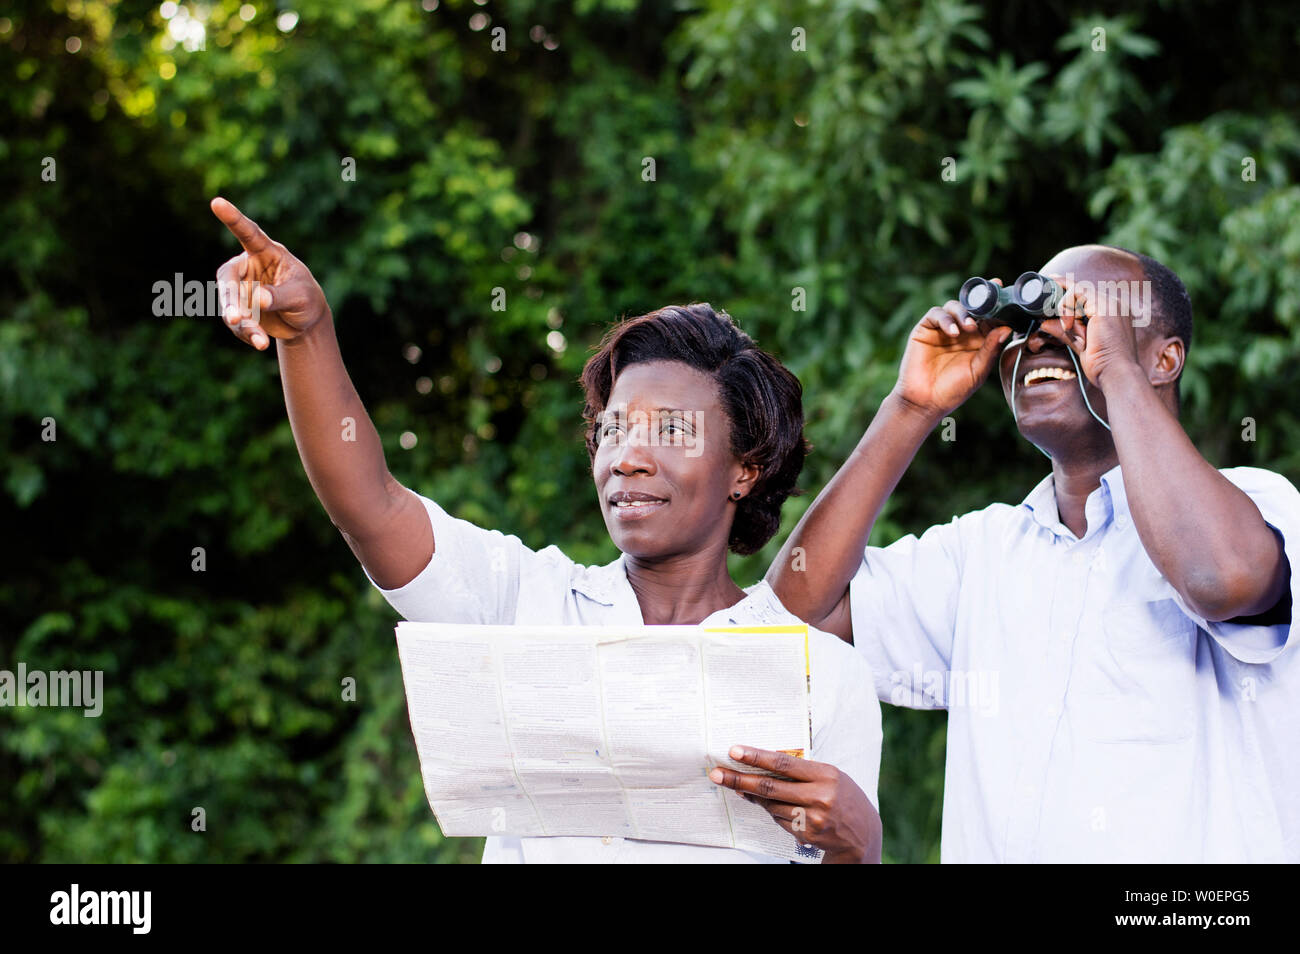 young woman pointing at something the young man looking through binoculars. Stock Photo